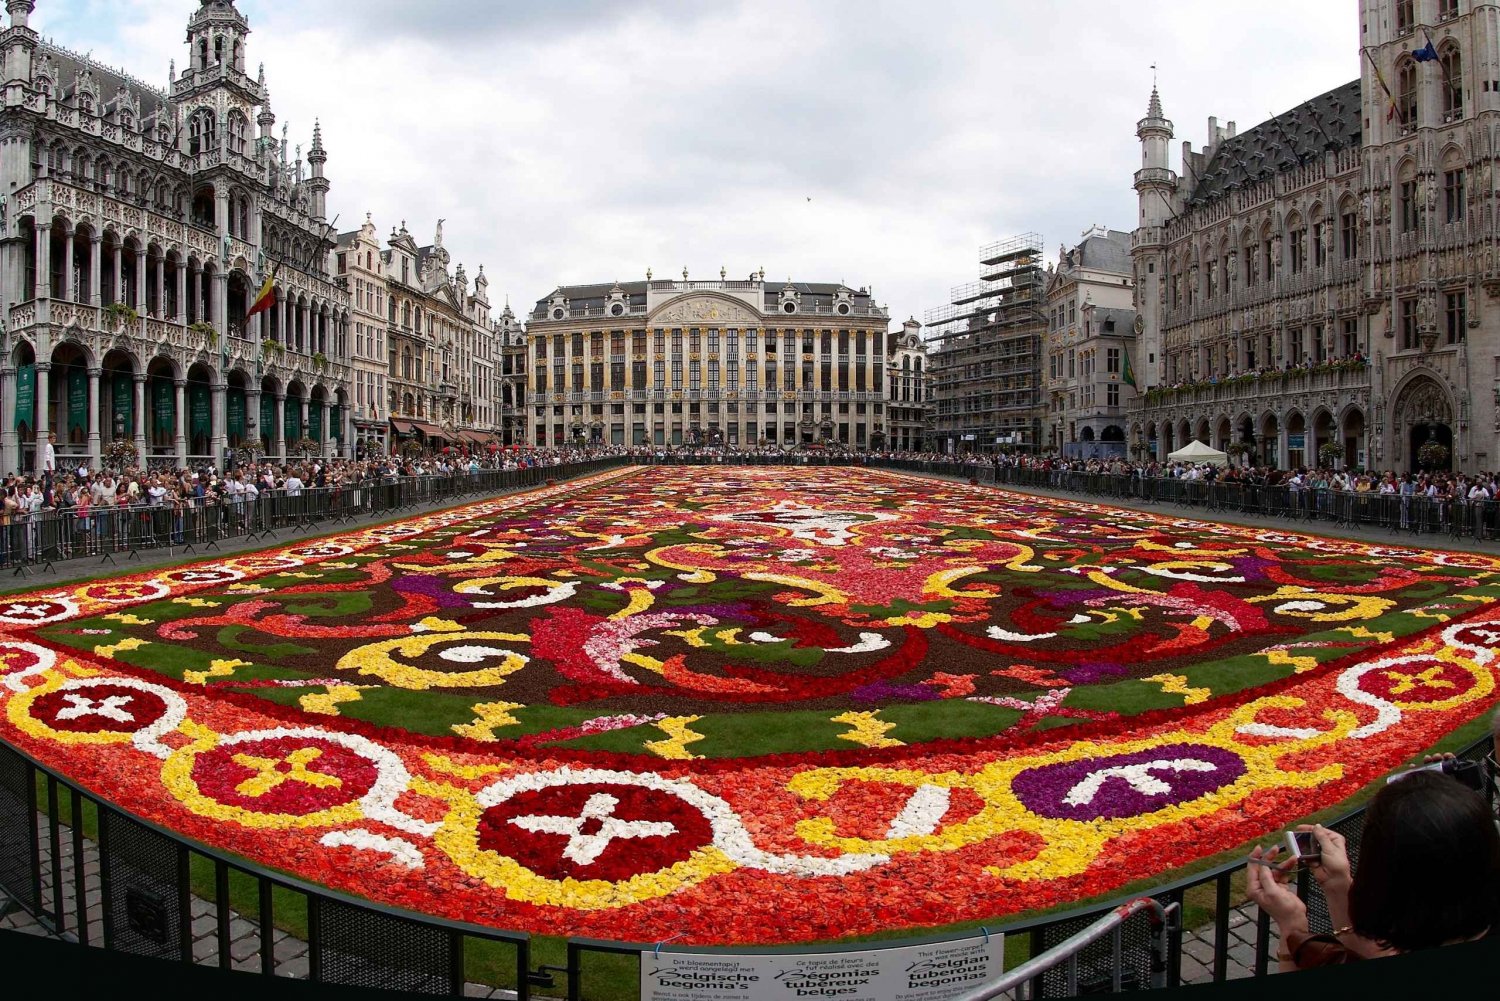 Brussels and Atomium: Flower Carpet Festival from Amsterdam